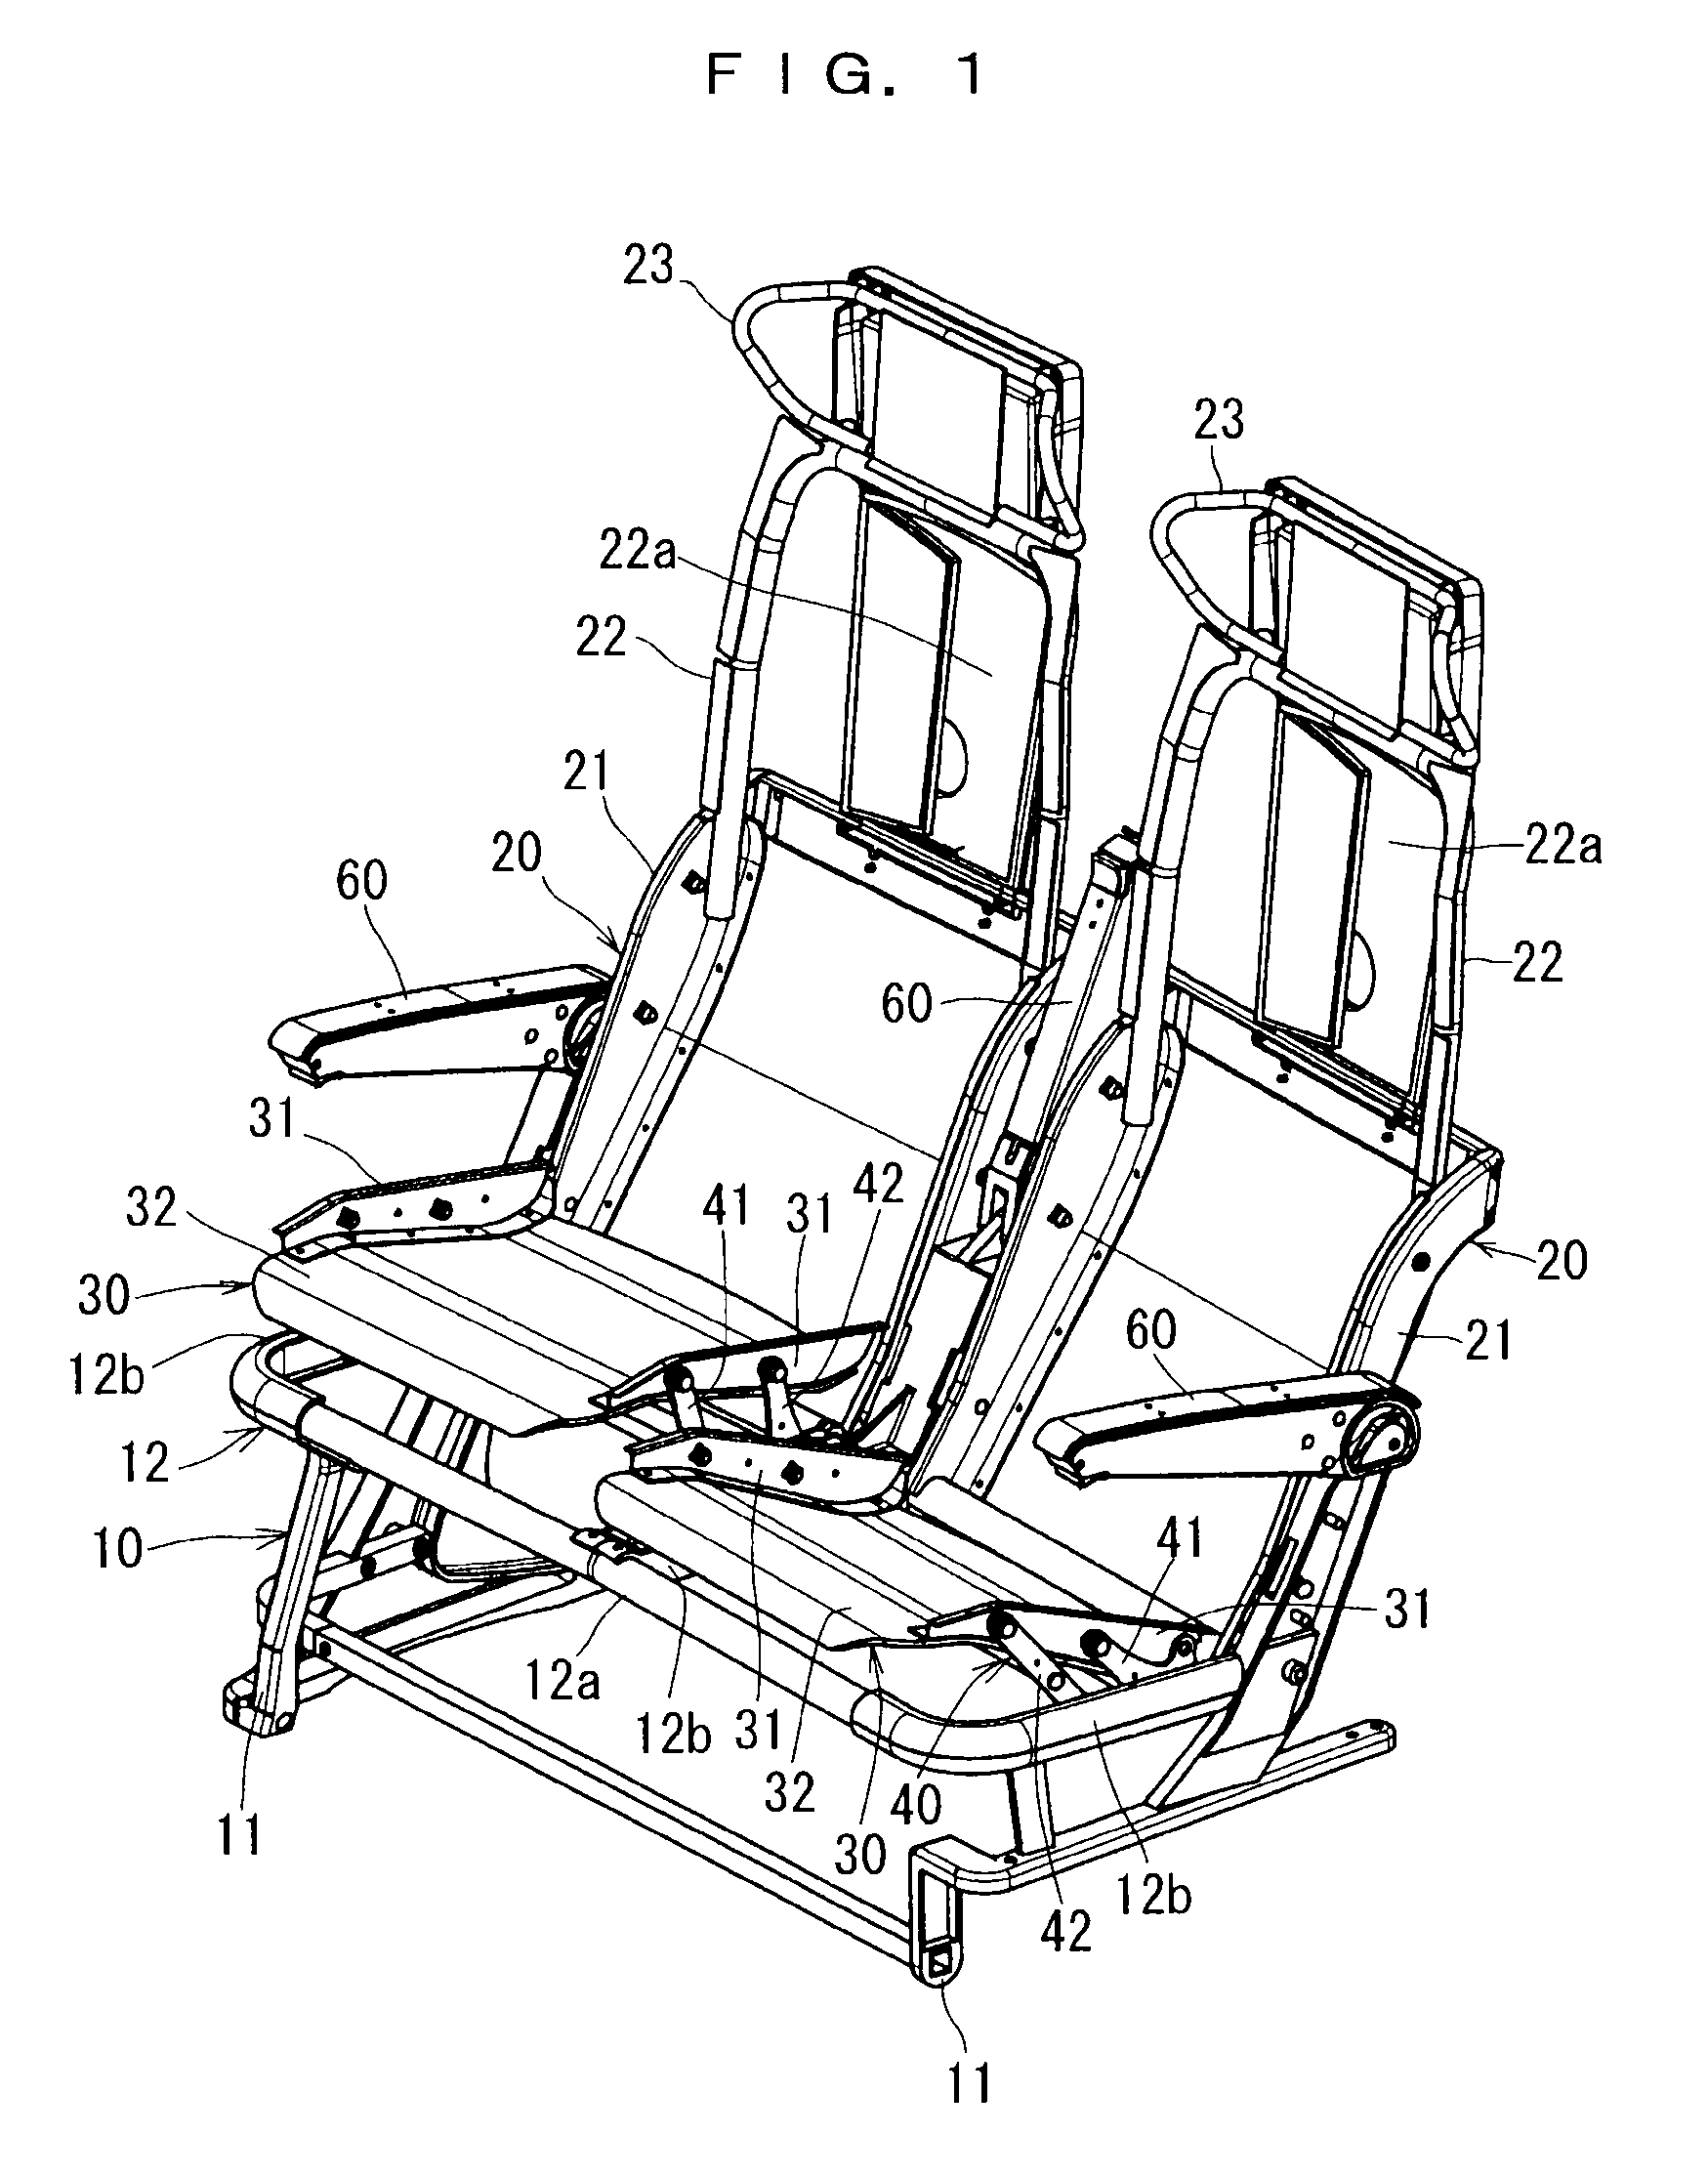 Seat structure